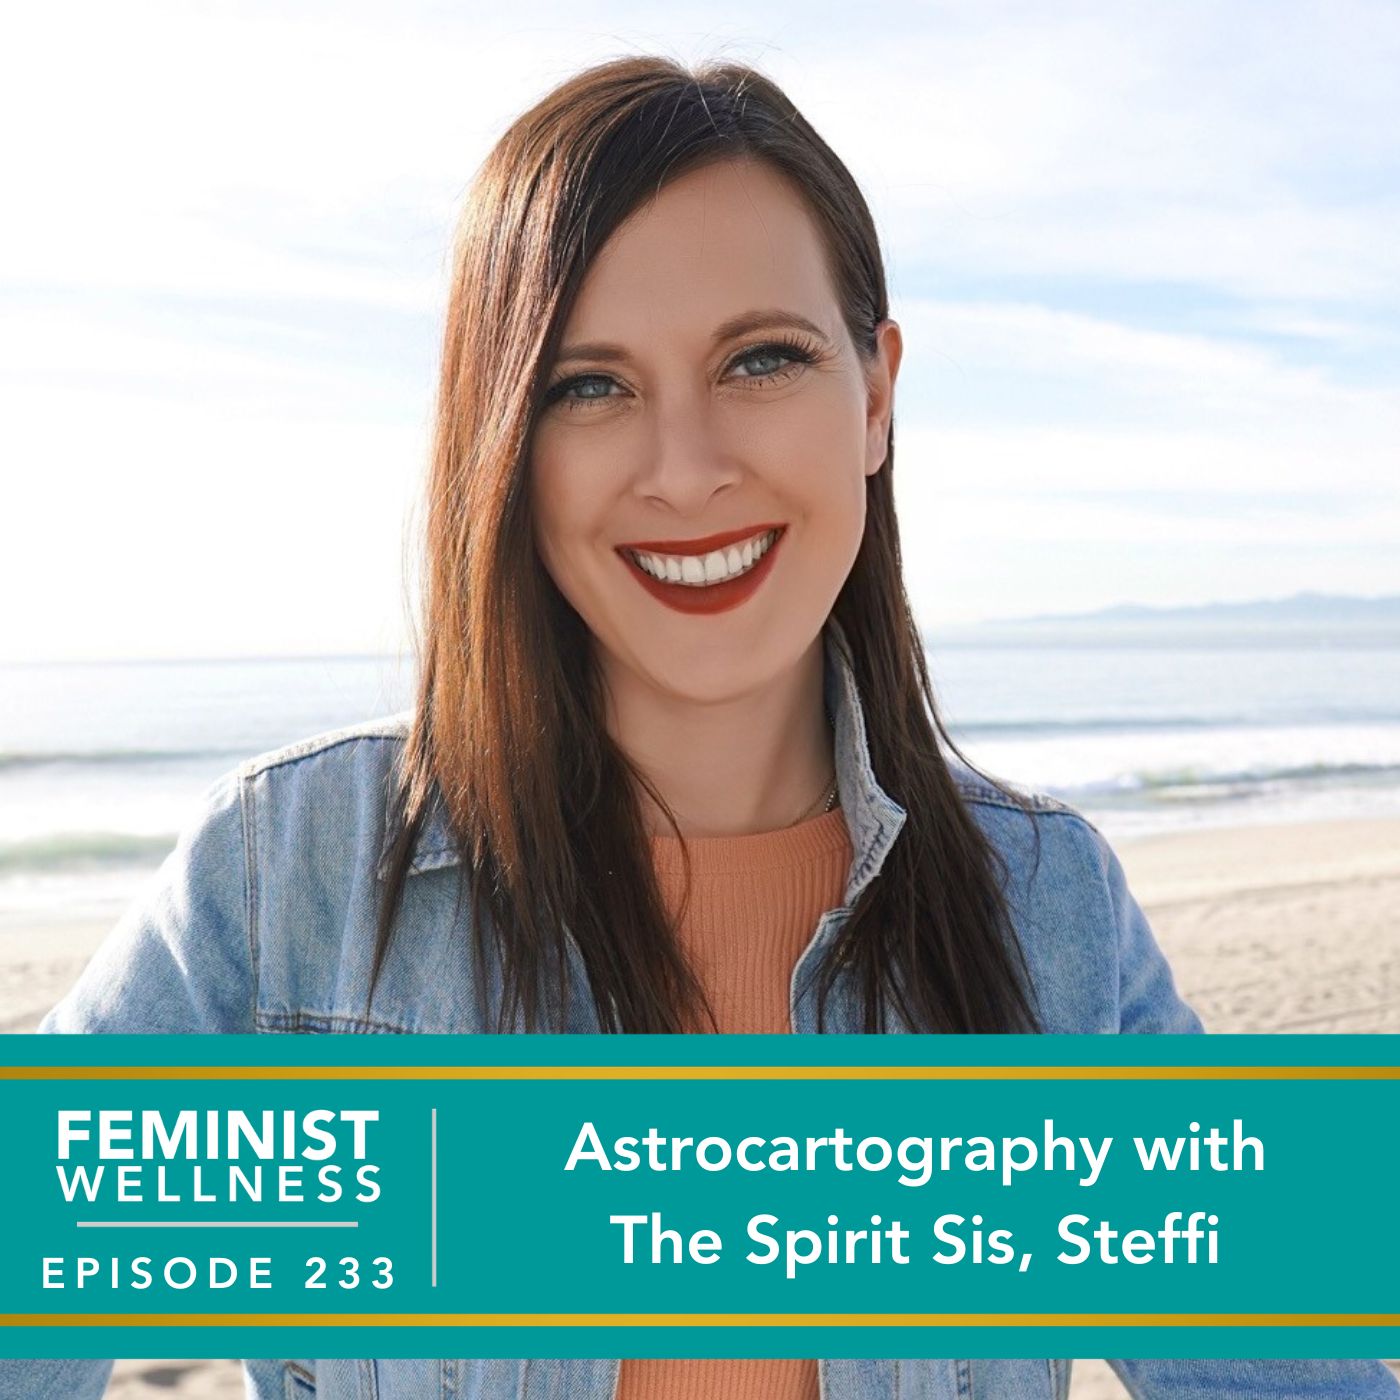 Feminist Wellness with Victoria Albina | Astrocartography with The Spirit Sis, Steffi